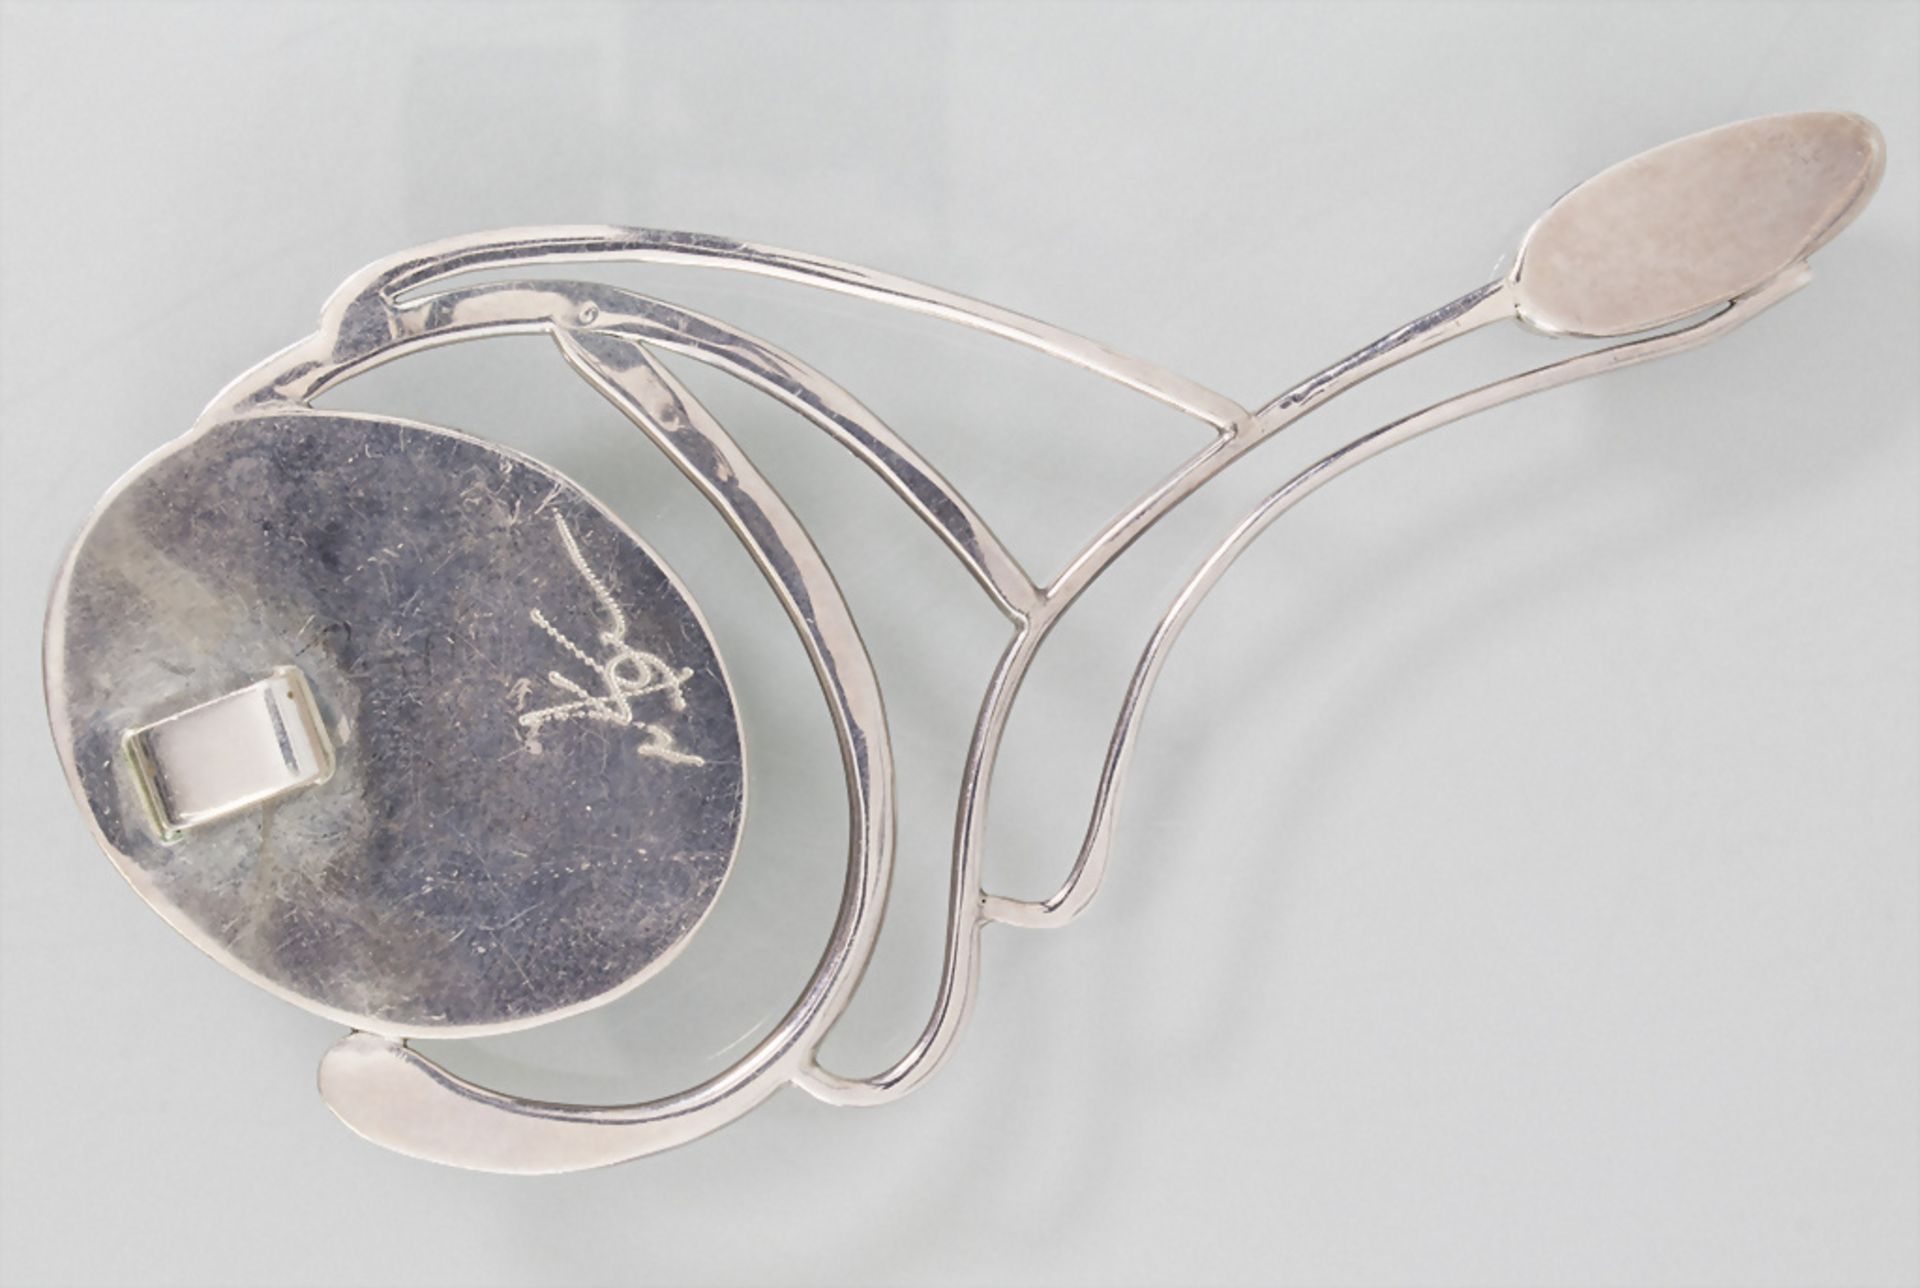 Designer Anhänger mit Achat / A silver designer pendant with agate - Image 2 of 3